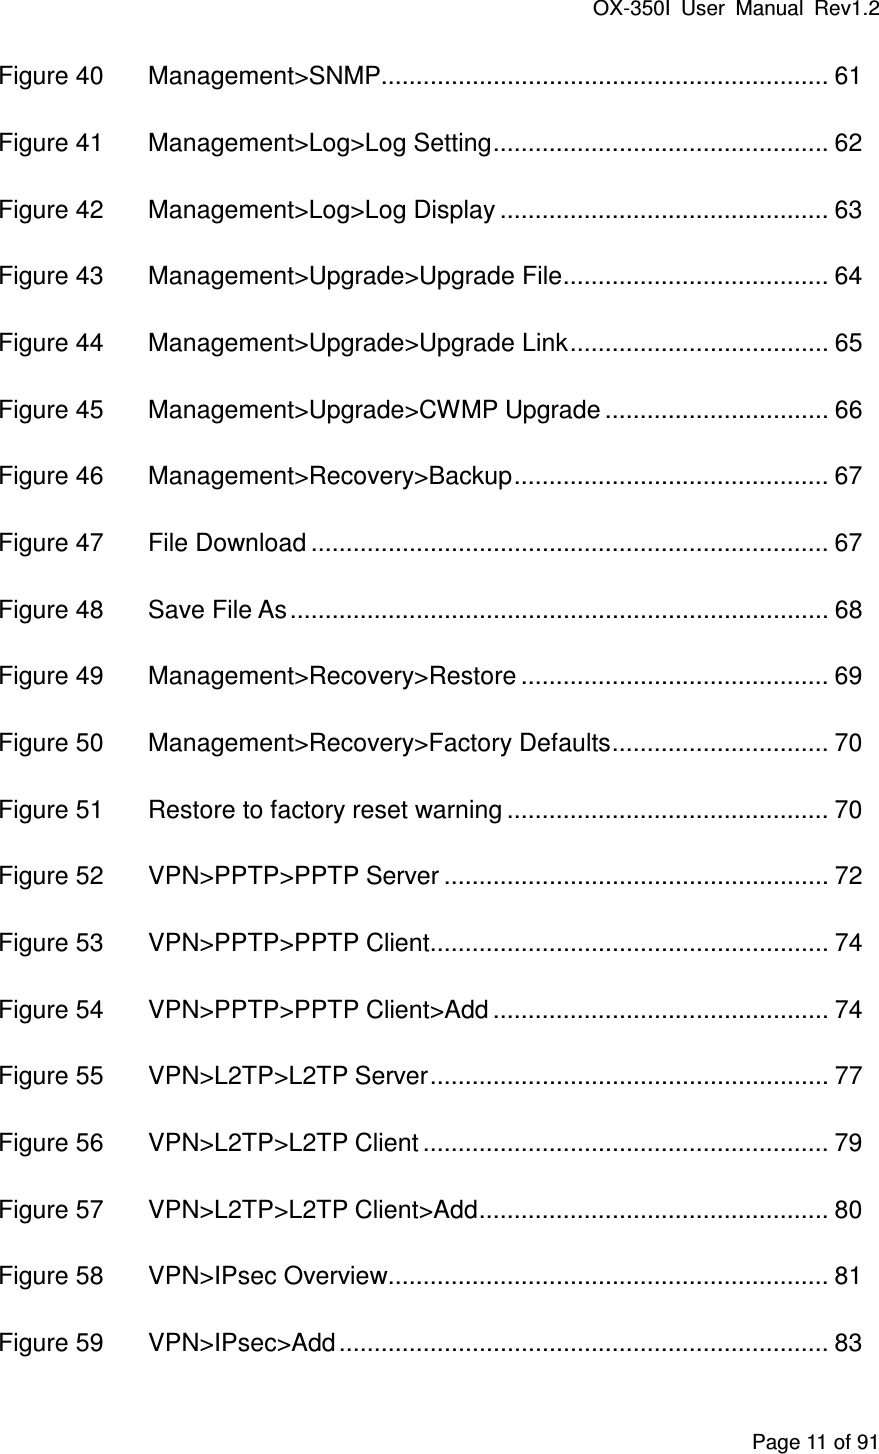 OX-350I  User  Manual  Rev1.2 Page 11 of 91 Figure 40 Management&gt;SNMP................................................................ 61 Figure 41 Management&gt;Log&gt;Log Setting ................................................ 62 Figure 42 Management&gt;Log&gt;Log Display ............................................... 63 Figure 43 Management&gt;Upgrade&gt;Upgrade File ...................................... 64 Figure 44 Management&gt;Upgrade&gt;Upgrade Link ..................................... 65 Figure 45 Management&gt;Upgrade&gt;CWMP Upgrade ................................ 66 Figure 46 Management&gt;Recovery&gt;Backup ............................................. 67 Figure 47 File Download .......................................................................... 67 Figure 48 Save File As ............................................................................. 68 Figure 49 Management&gt;Recovery&gt;Restore ............................................ 69 Figure 50 Management&gt;Recovery&gt;Factory Defaults ............................... 70 Figure 51 Restore to factory reset warning .............................................. 70 Figure 52 VPN&gt;PPTP&gt;PPTP Server ....................................................... 72 Figure 53 VPN&gt;PPTP&gt;PPTP Client ......................................................... 74 Figure 54 VPN&gt;PPTP&gt;PPTP Client&gt;Add ................................................ 74 Figure 55 VPN&gt;L2TP&gt;L2TP Server ......................................................... 77 Figure 56 VPN&gt;L2TP&gt;L2TP Client .......................................................... 79 Figure 57 VPN&gt;L2TP&gt;L2TP Client&gt;Add .................................................. 80 Figure 58 VPN&gt;IPsec Overview............................................................... 81 Figure 59 VPN&gt;IPsec&gt;Add ...................................................................... 83 